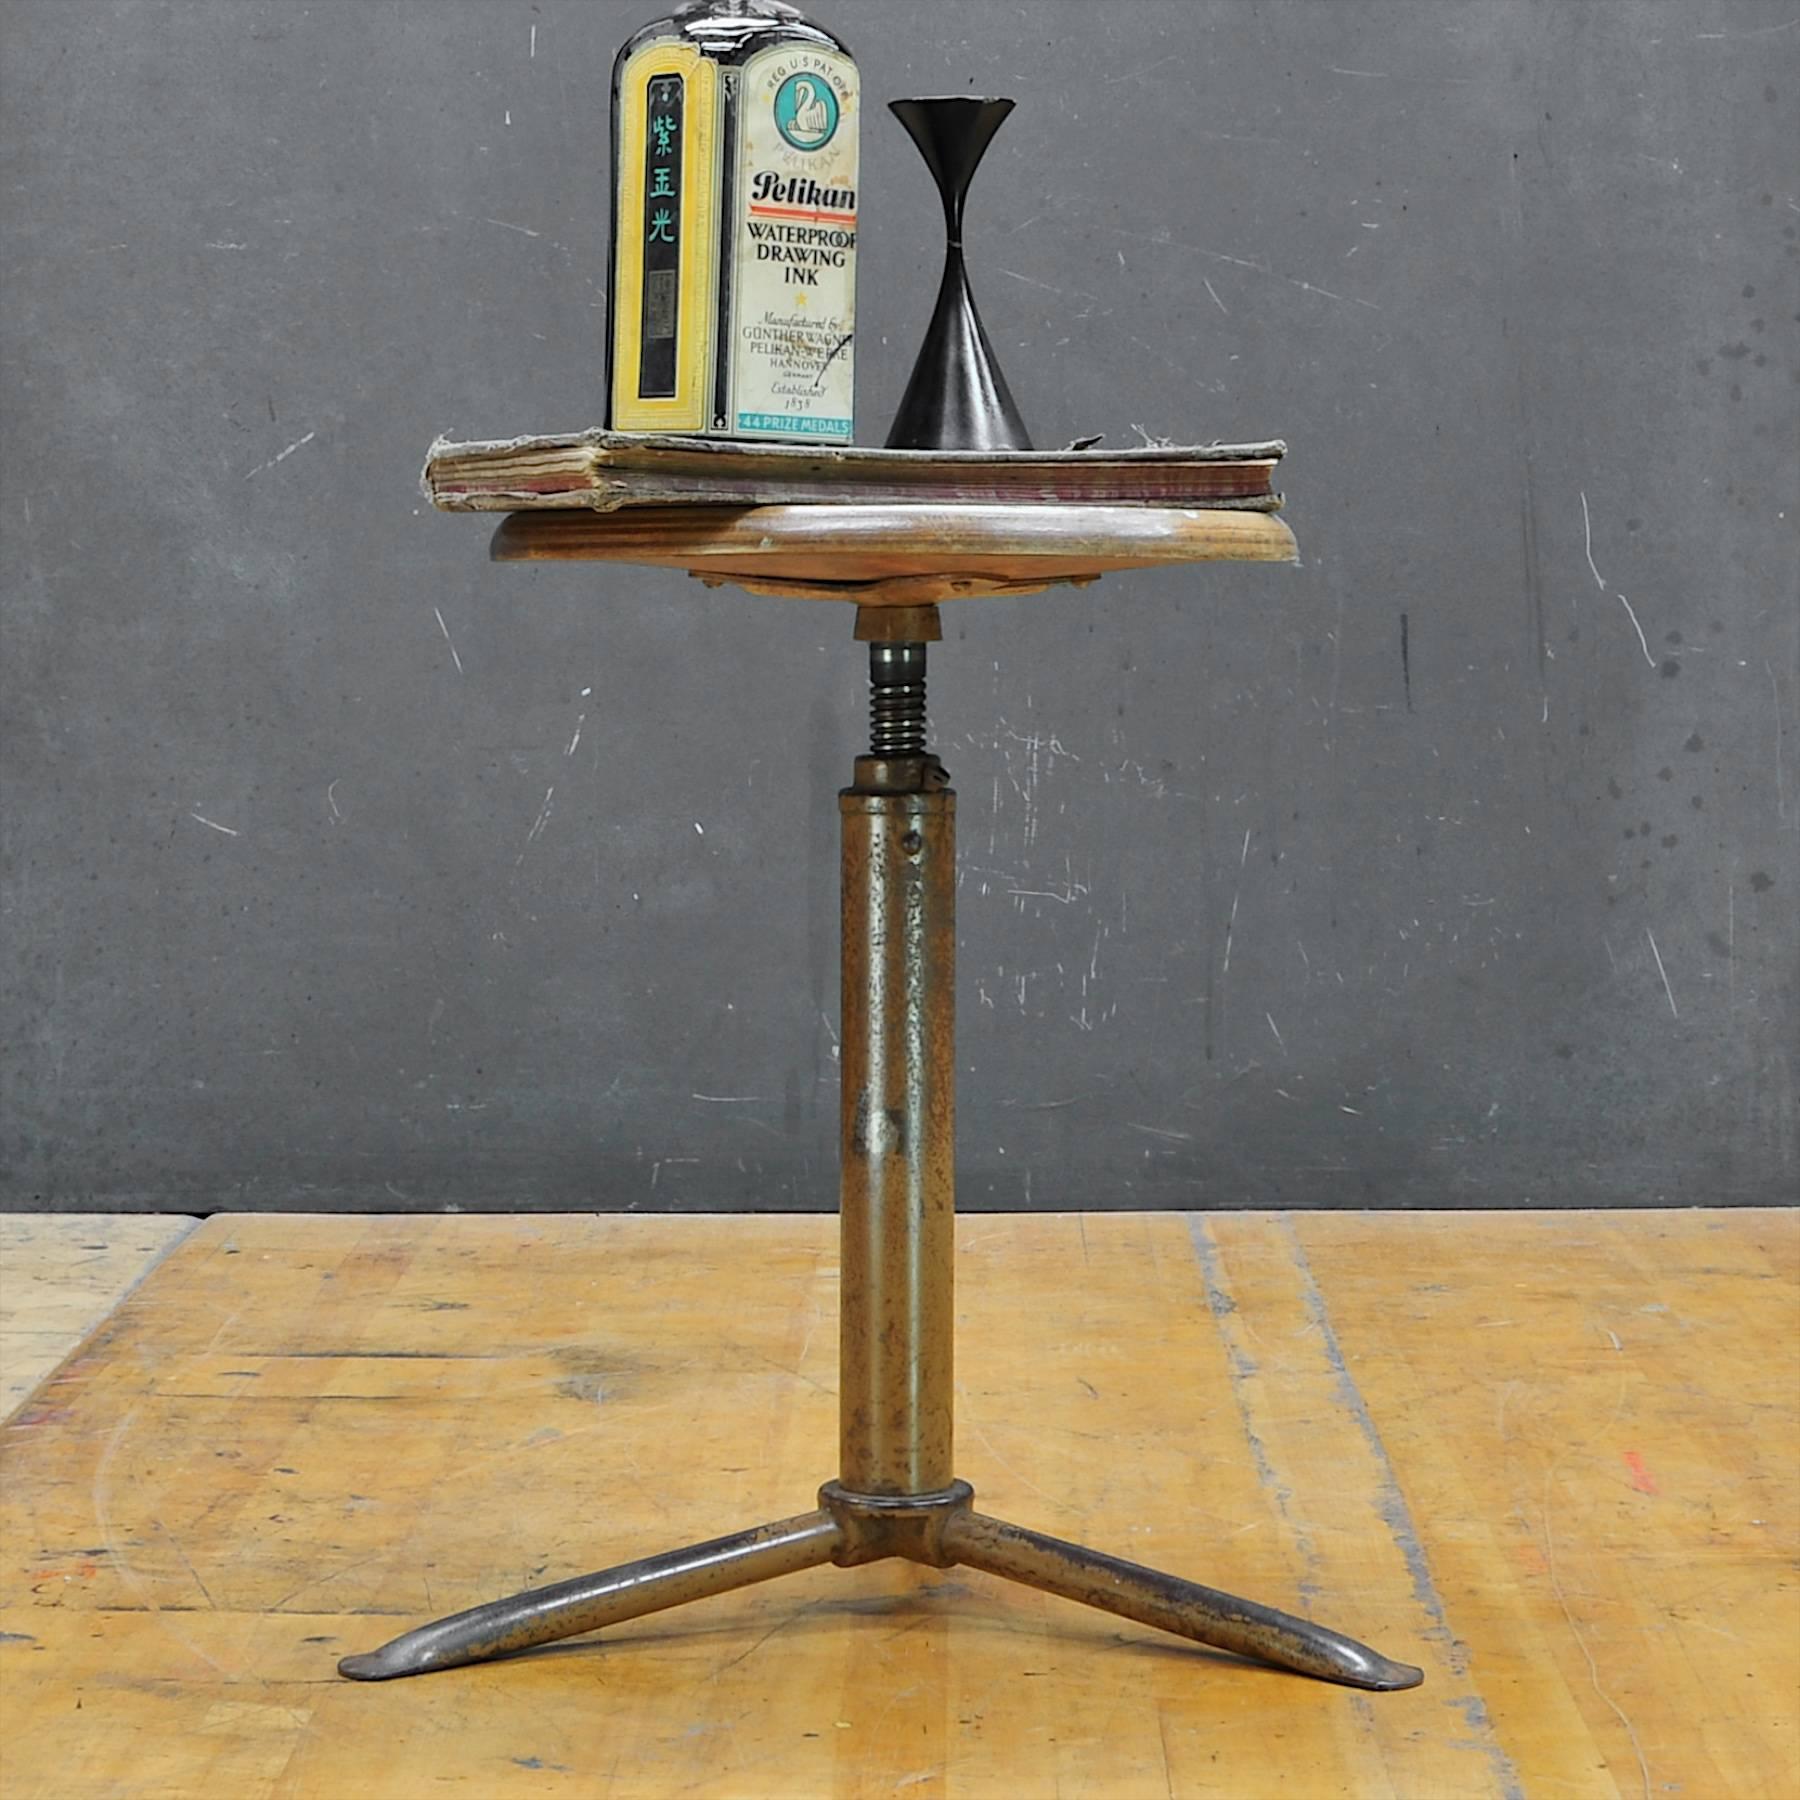 Art Professor's Workshop spinner stool. Cast Iron and Steel Tripod Pedestal. Very Good Vintage Condition, Sturdy, Level, and smoothly Functional.